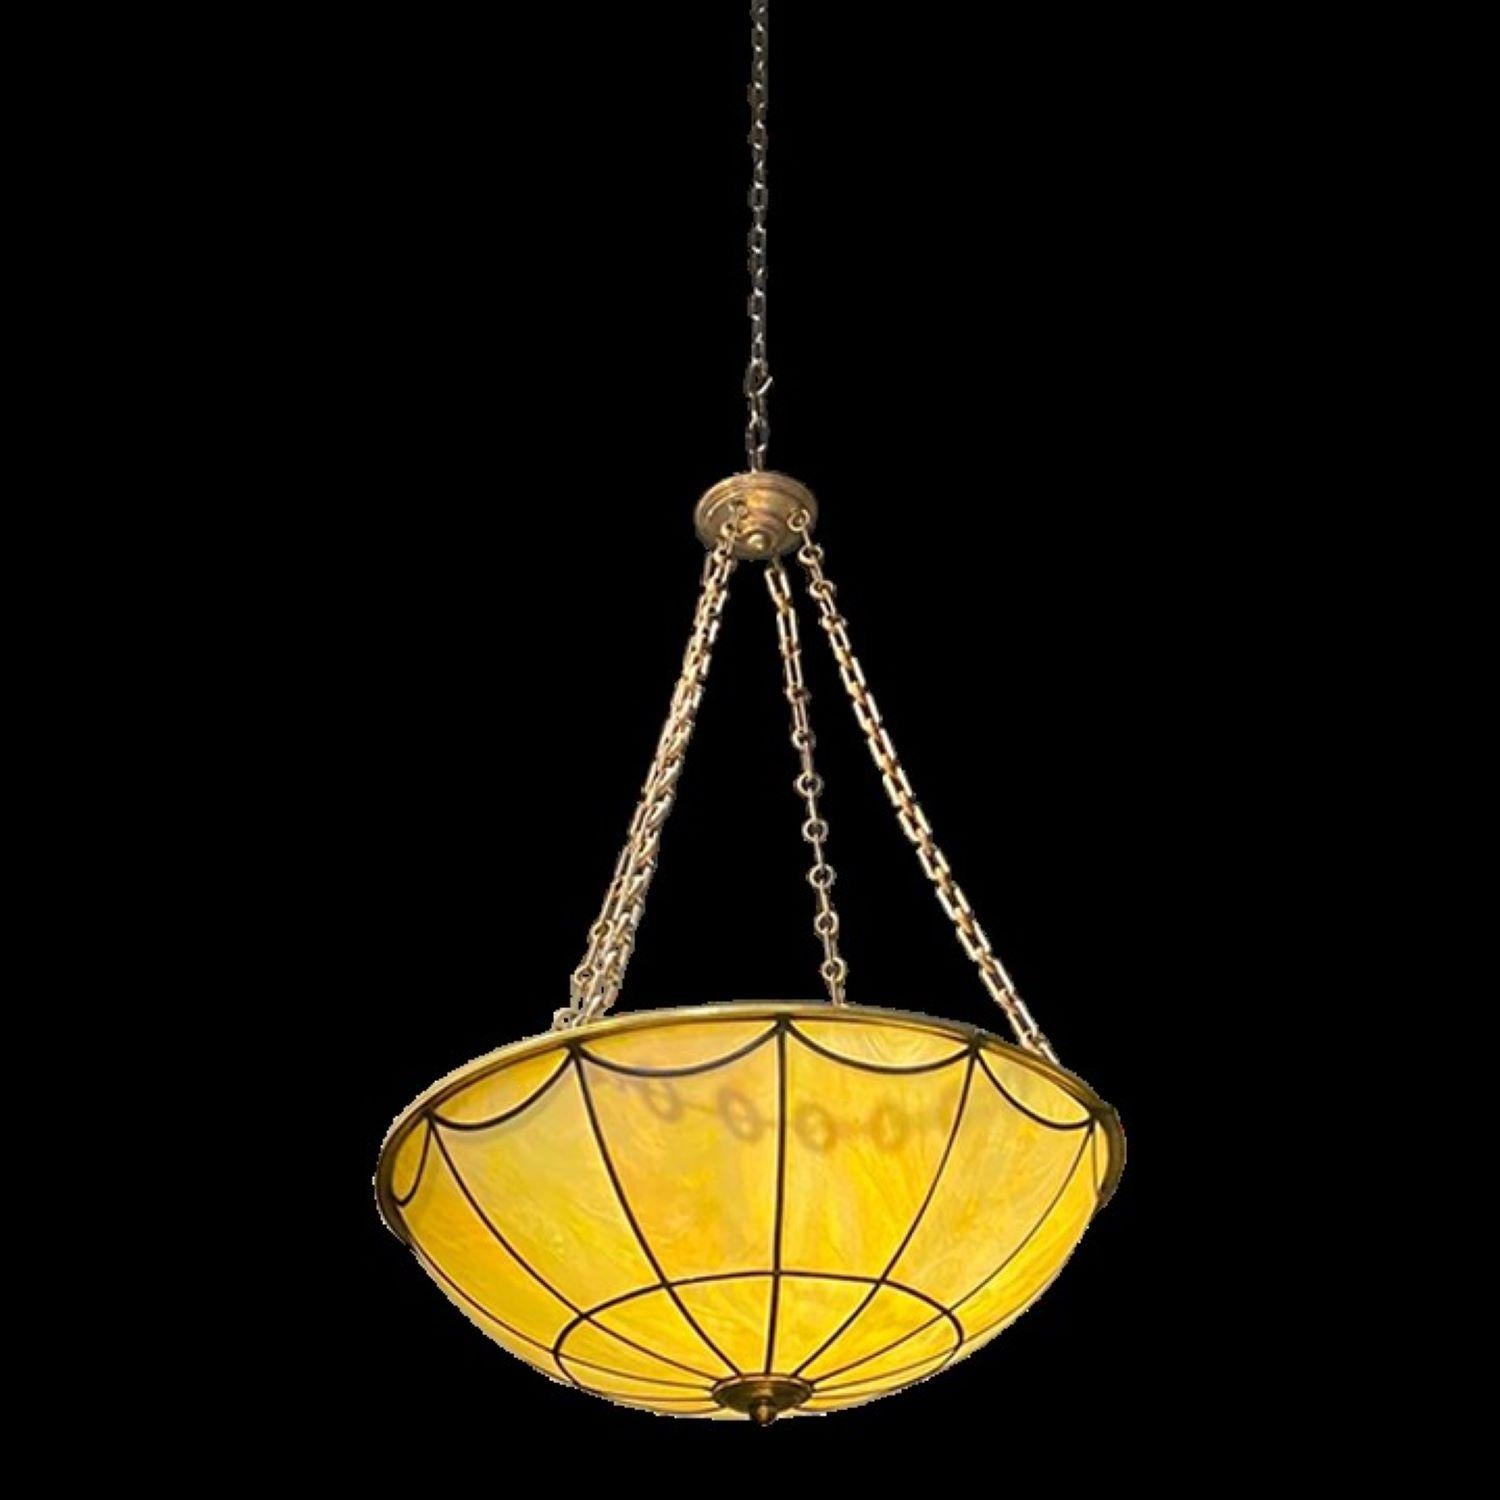 A circa 1920's American leaded glass light fixture with 8 interior lights.